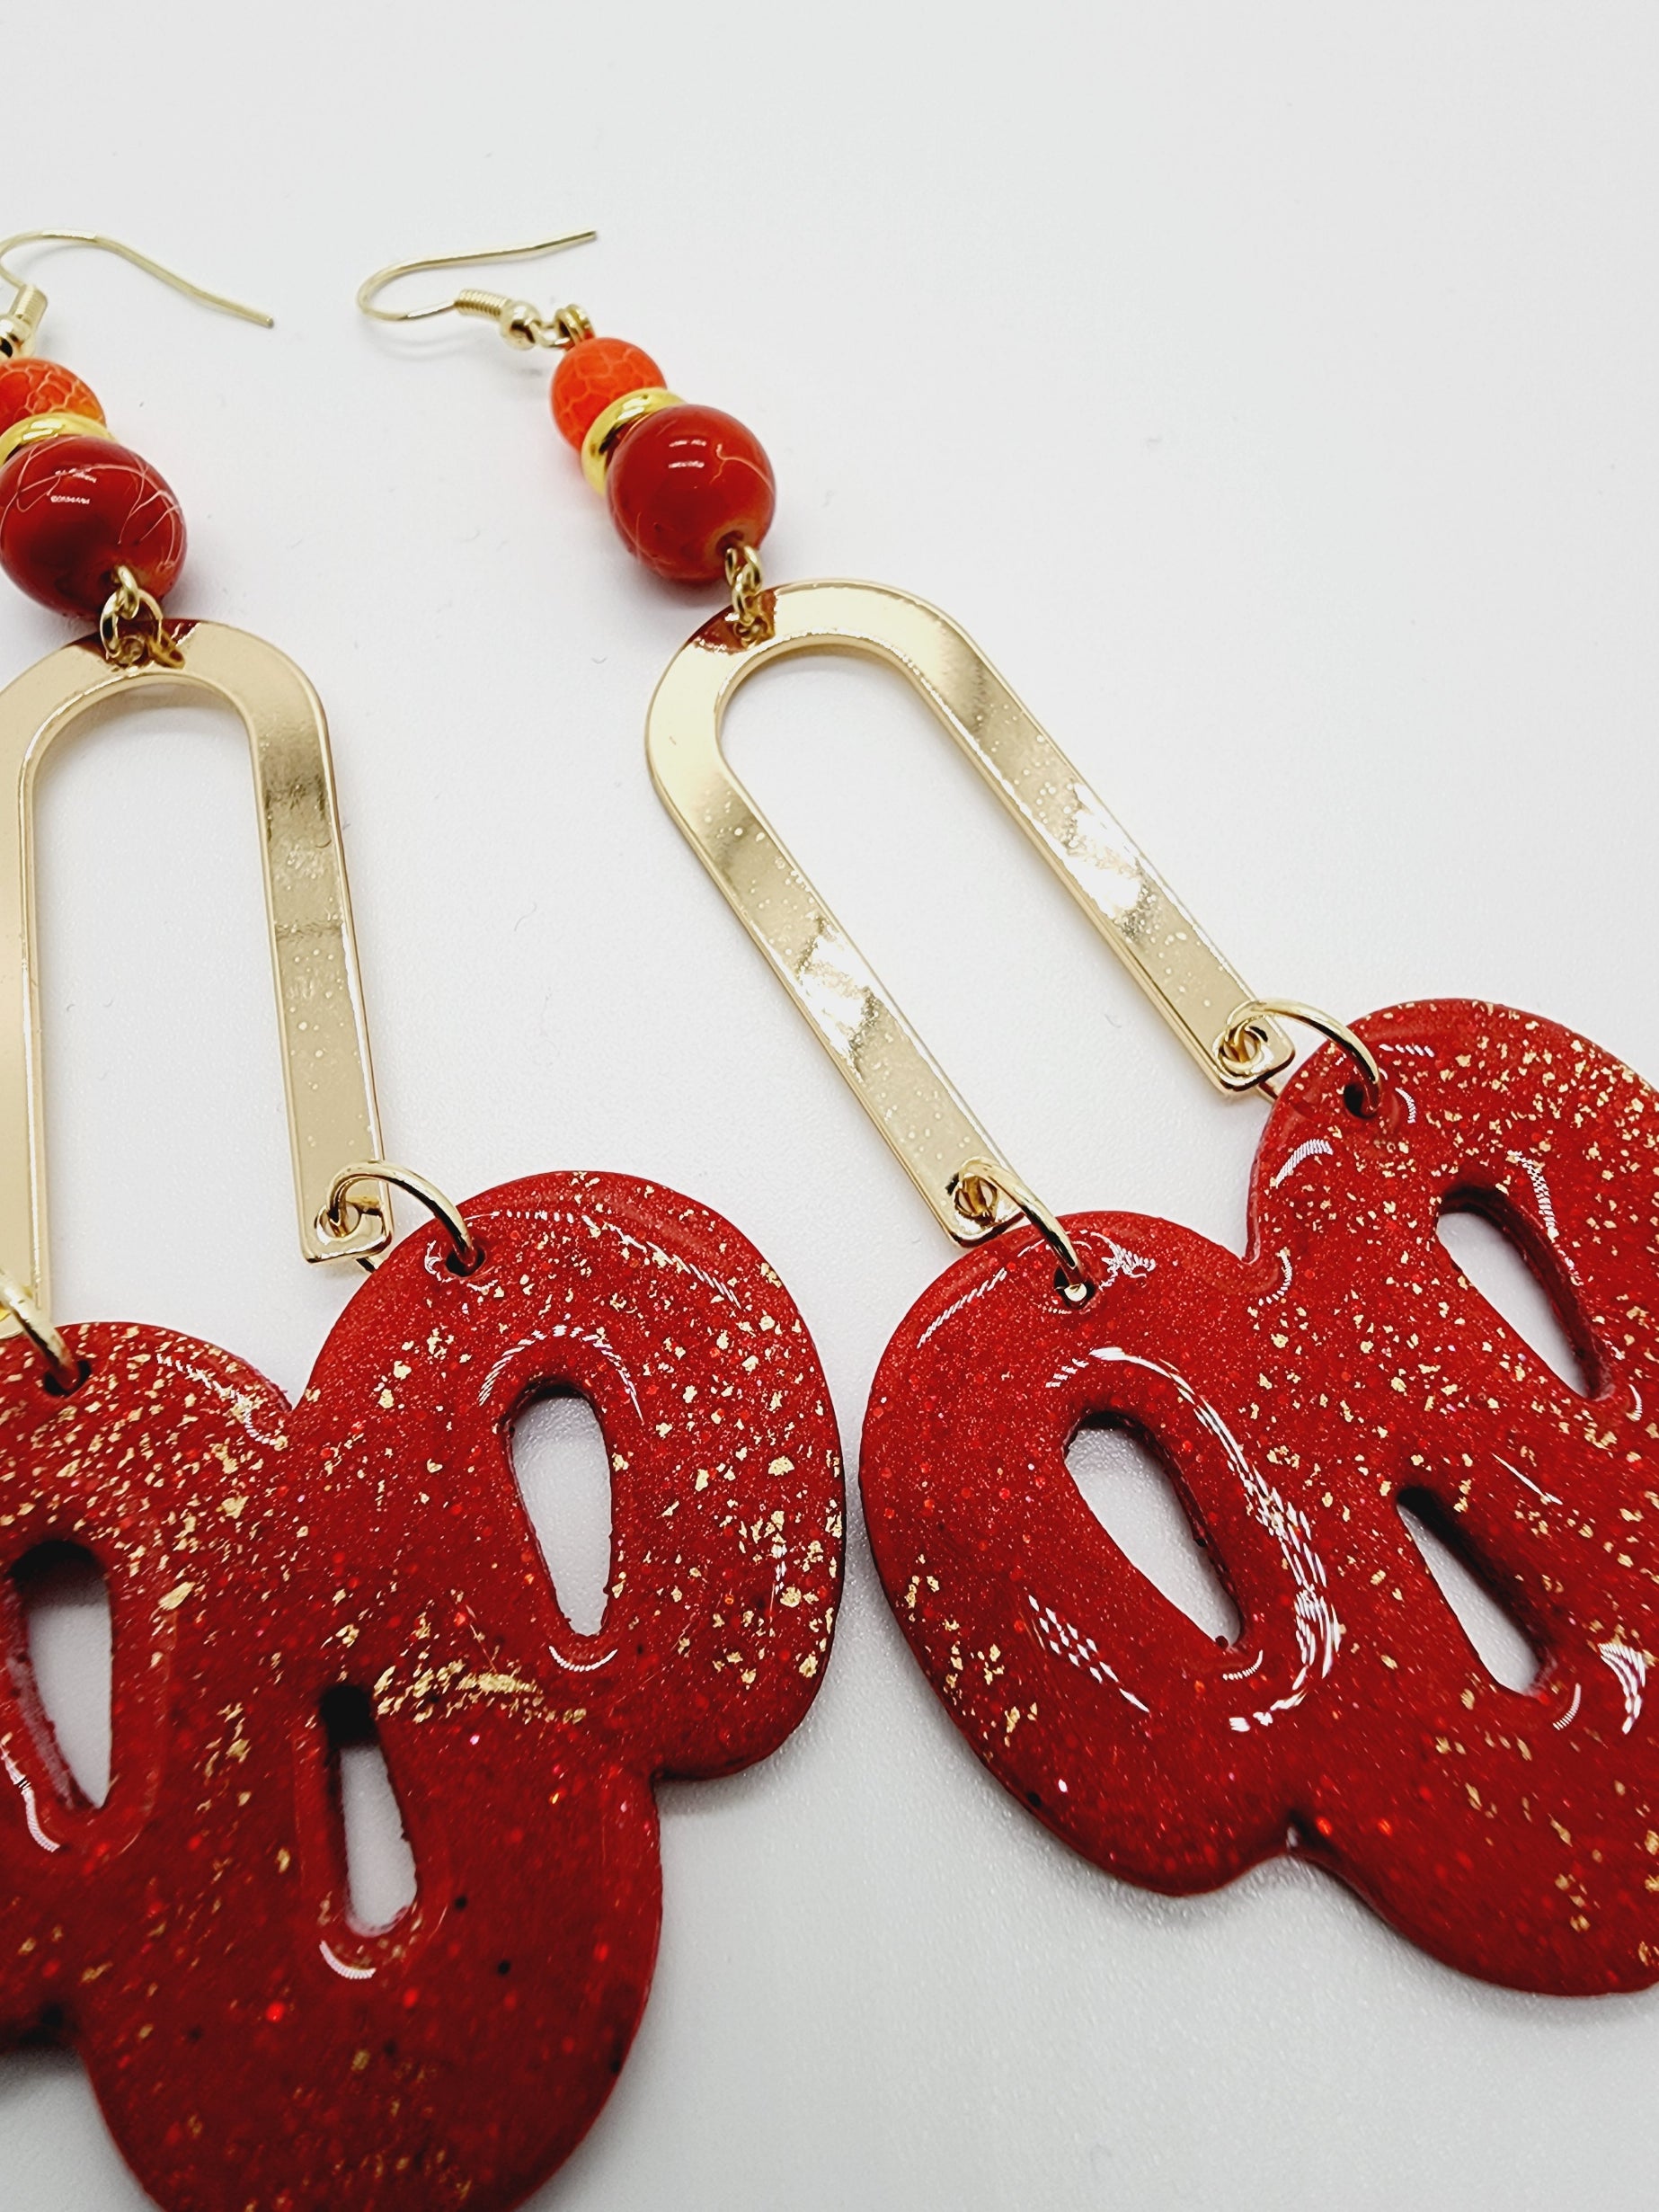 Length: 3.5 inches | Weight: 0.6 ounces   Distinctly You! These handmade earrings are made using red and gold polymer clay, red swirl beads, and hypoallergenic hooks with back closures. 